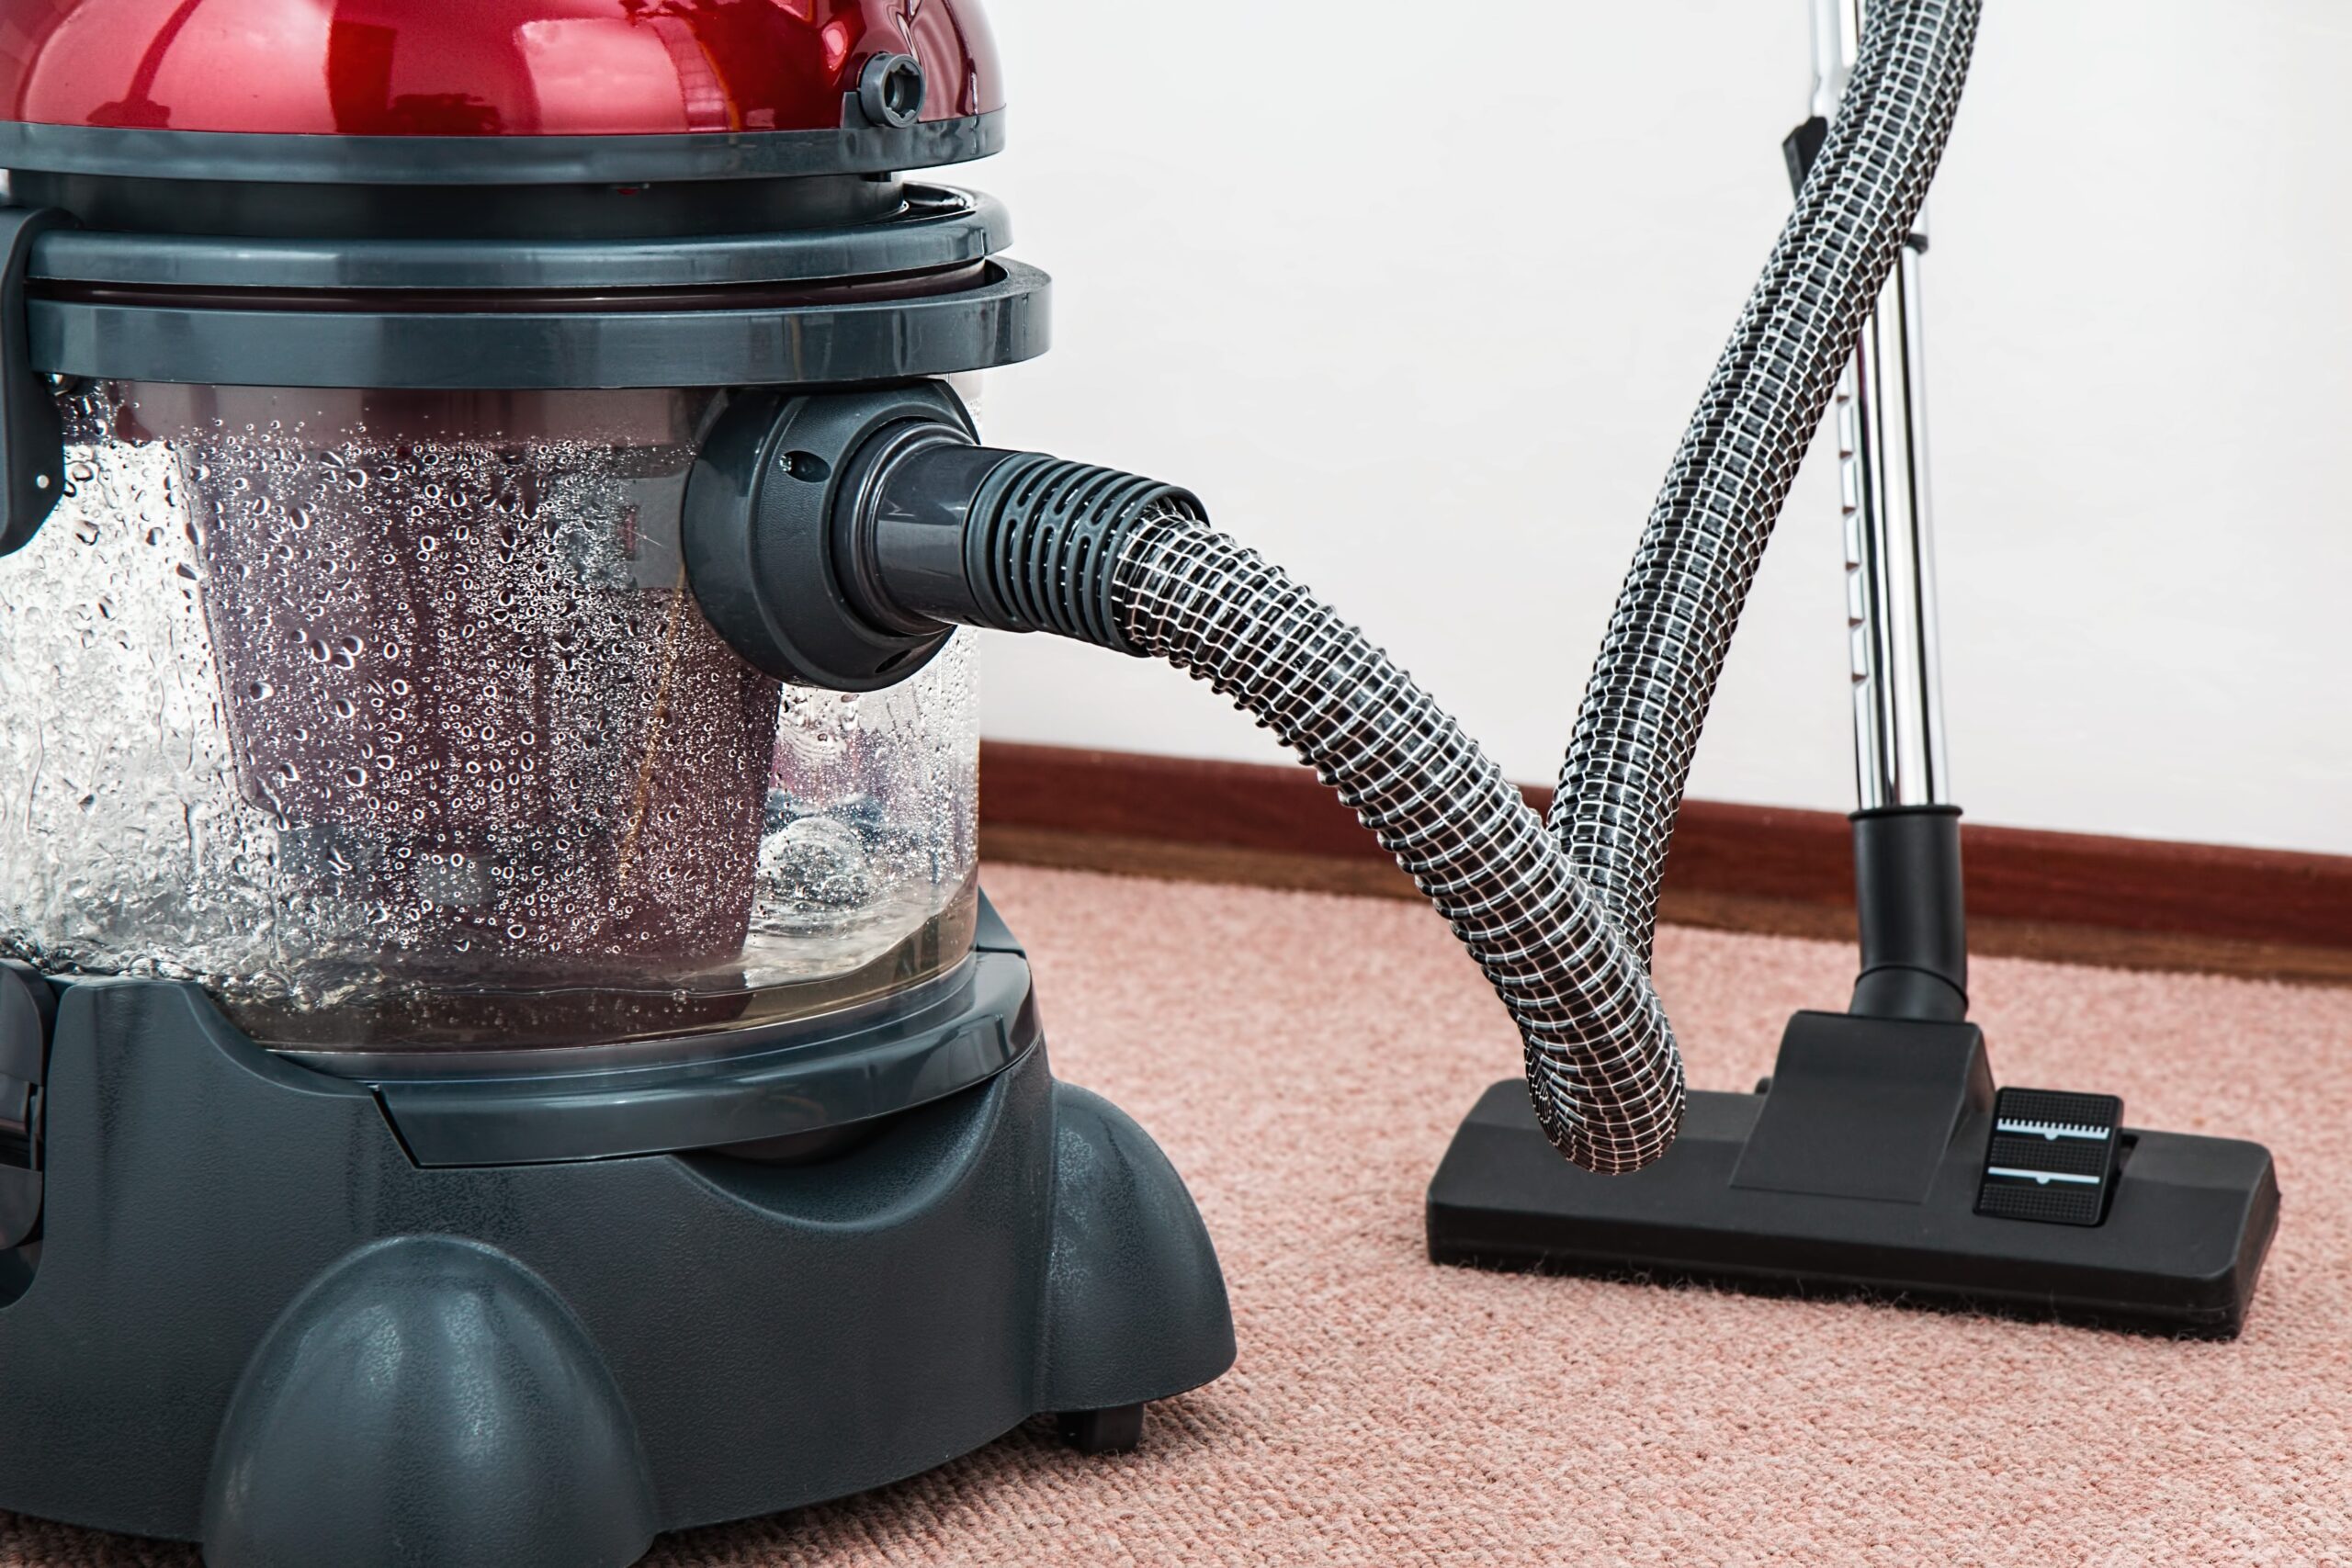 A wet and dry vacuum cleaner